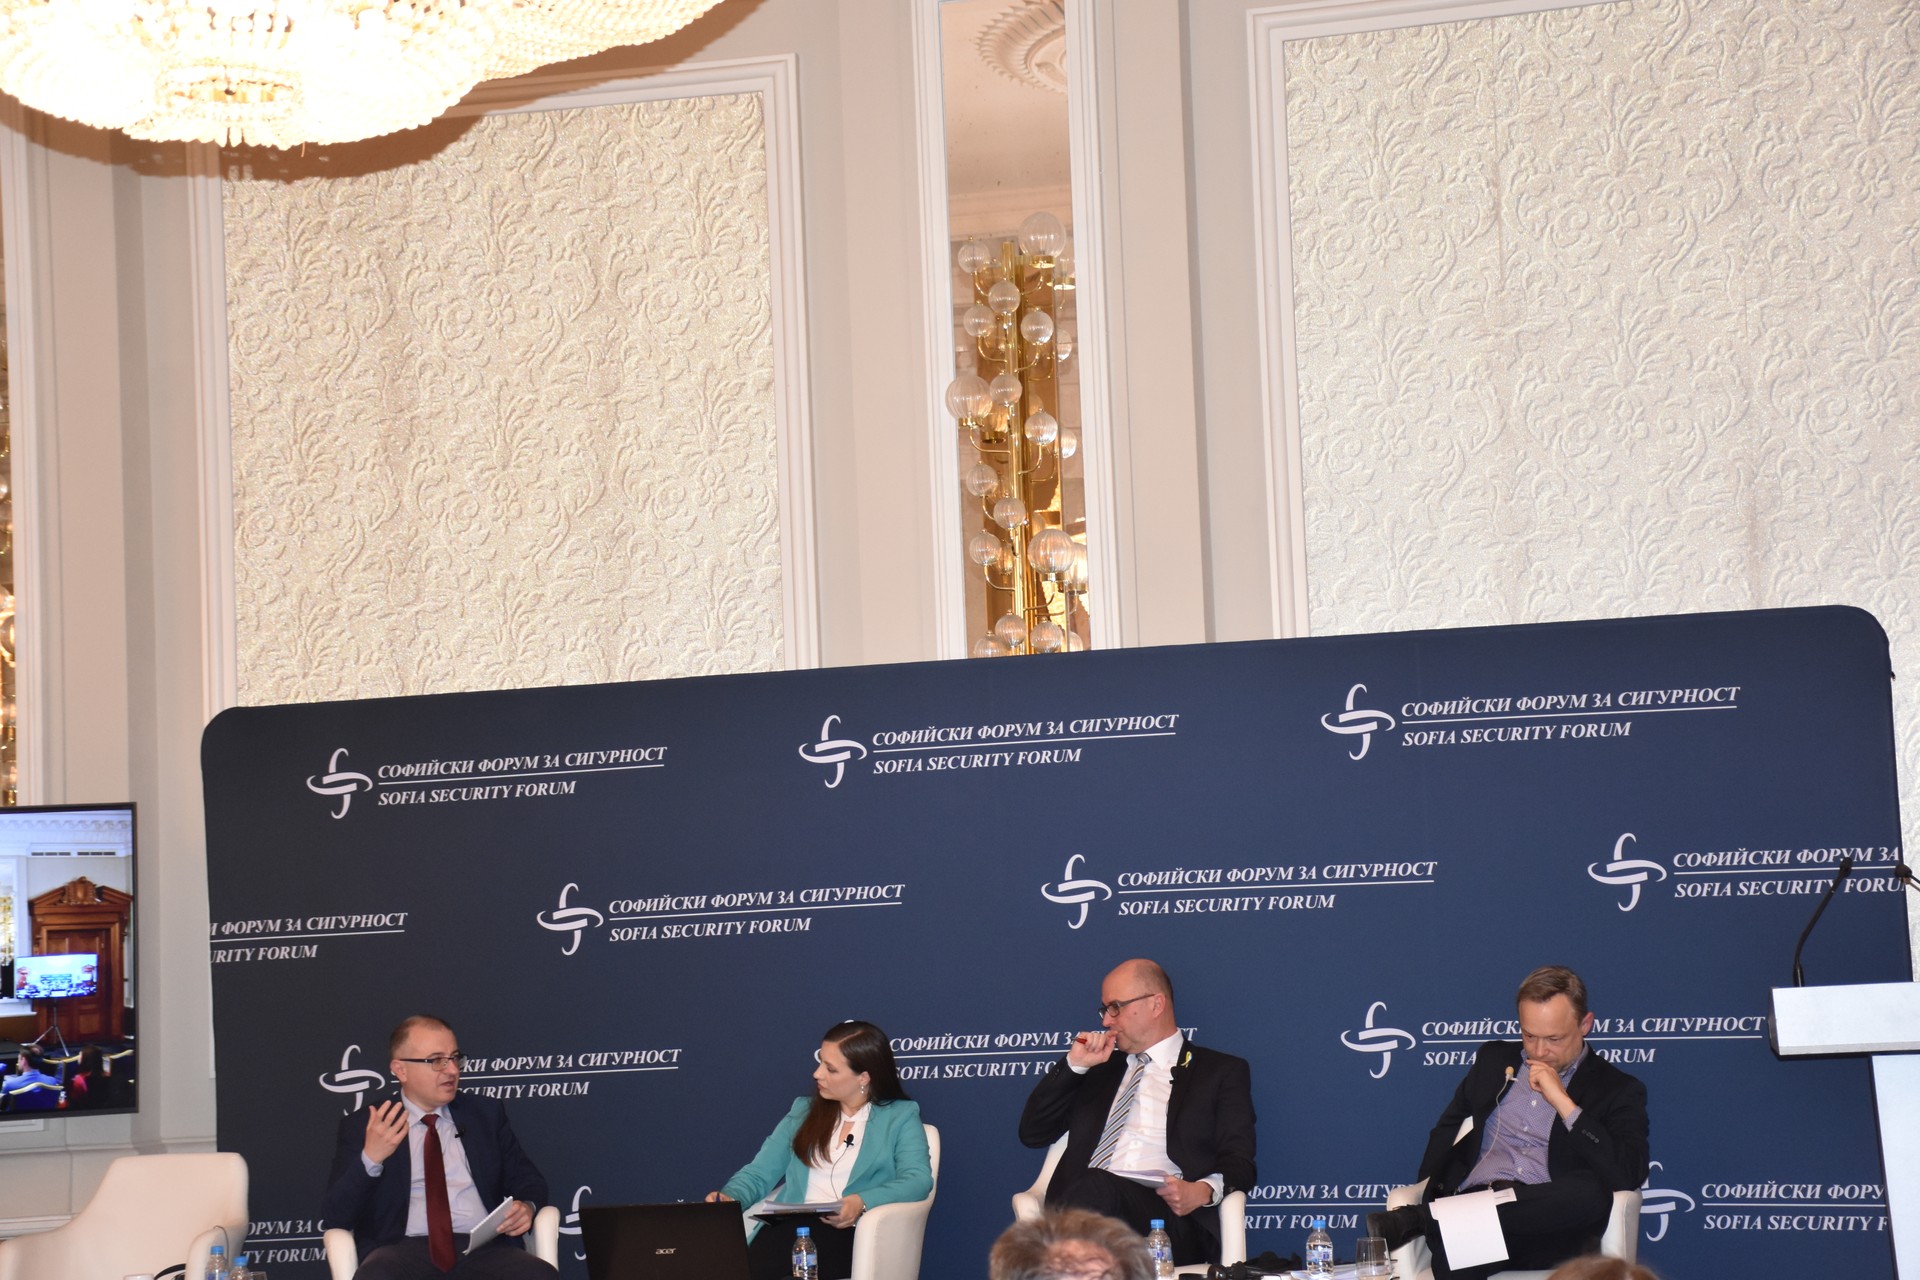 ADDRESSING THE CHALLENGES IN THE FRAGMENTING SECURITY ARCHITECTURE. COUNTERING RUSSIAN HYBRID ACTIVITIES